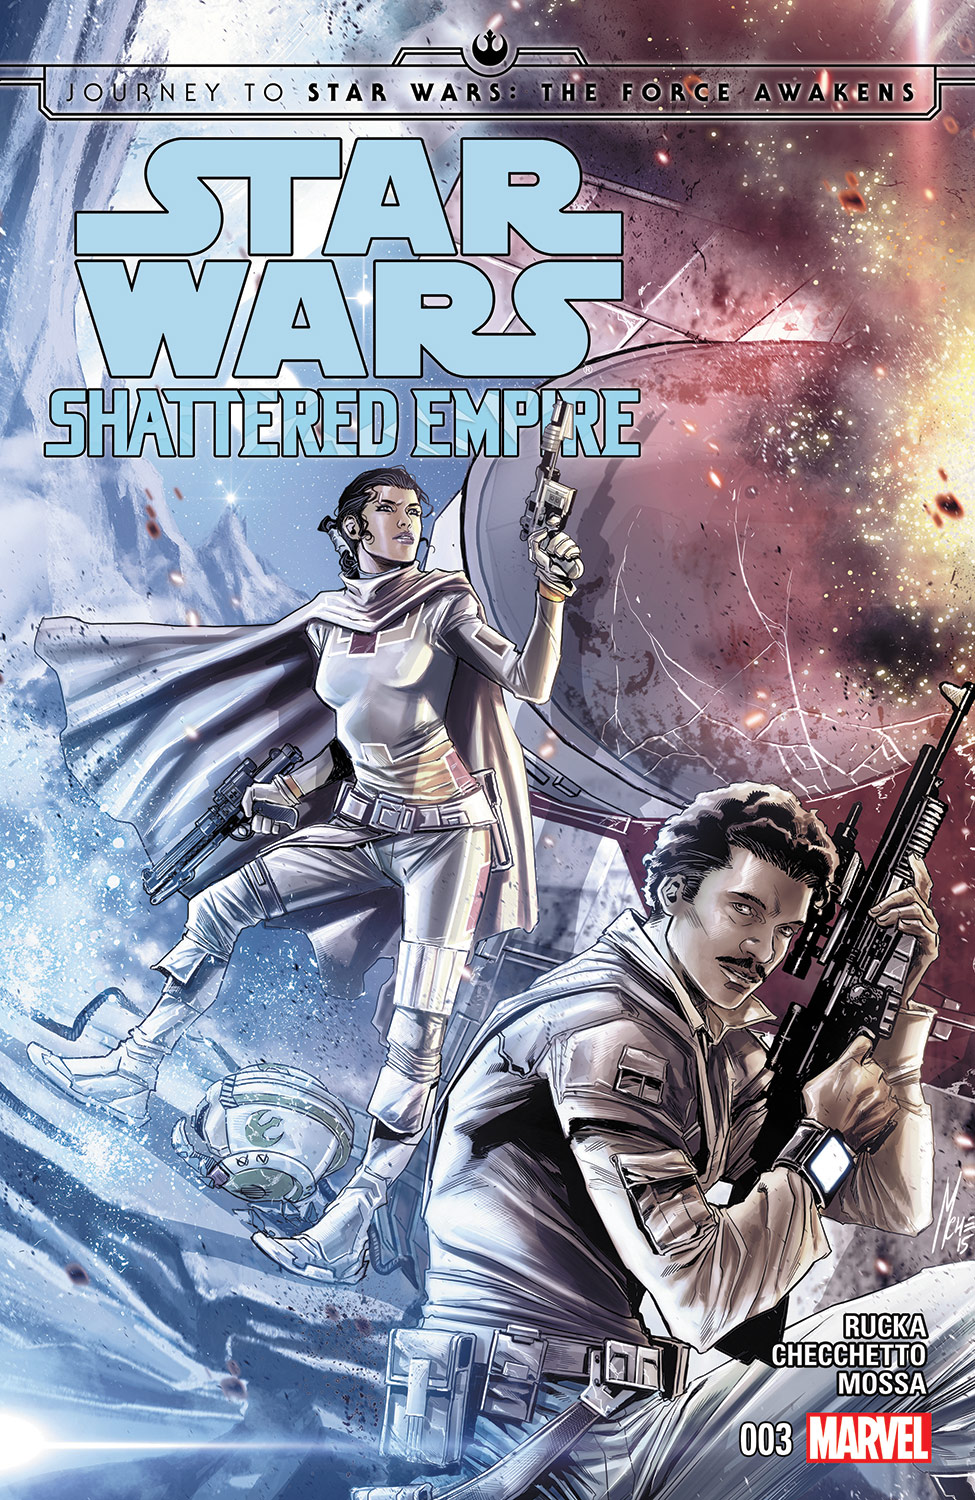 Journey to Star Wars: The Force Awakens - Shattered Empire (2015) #3